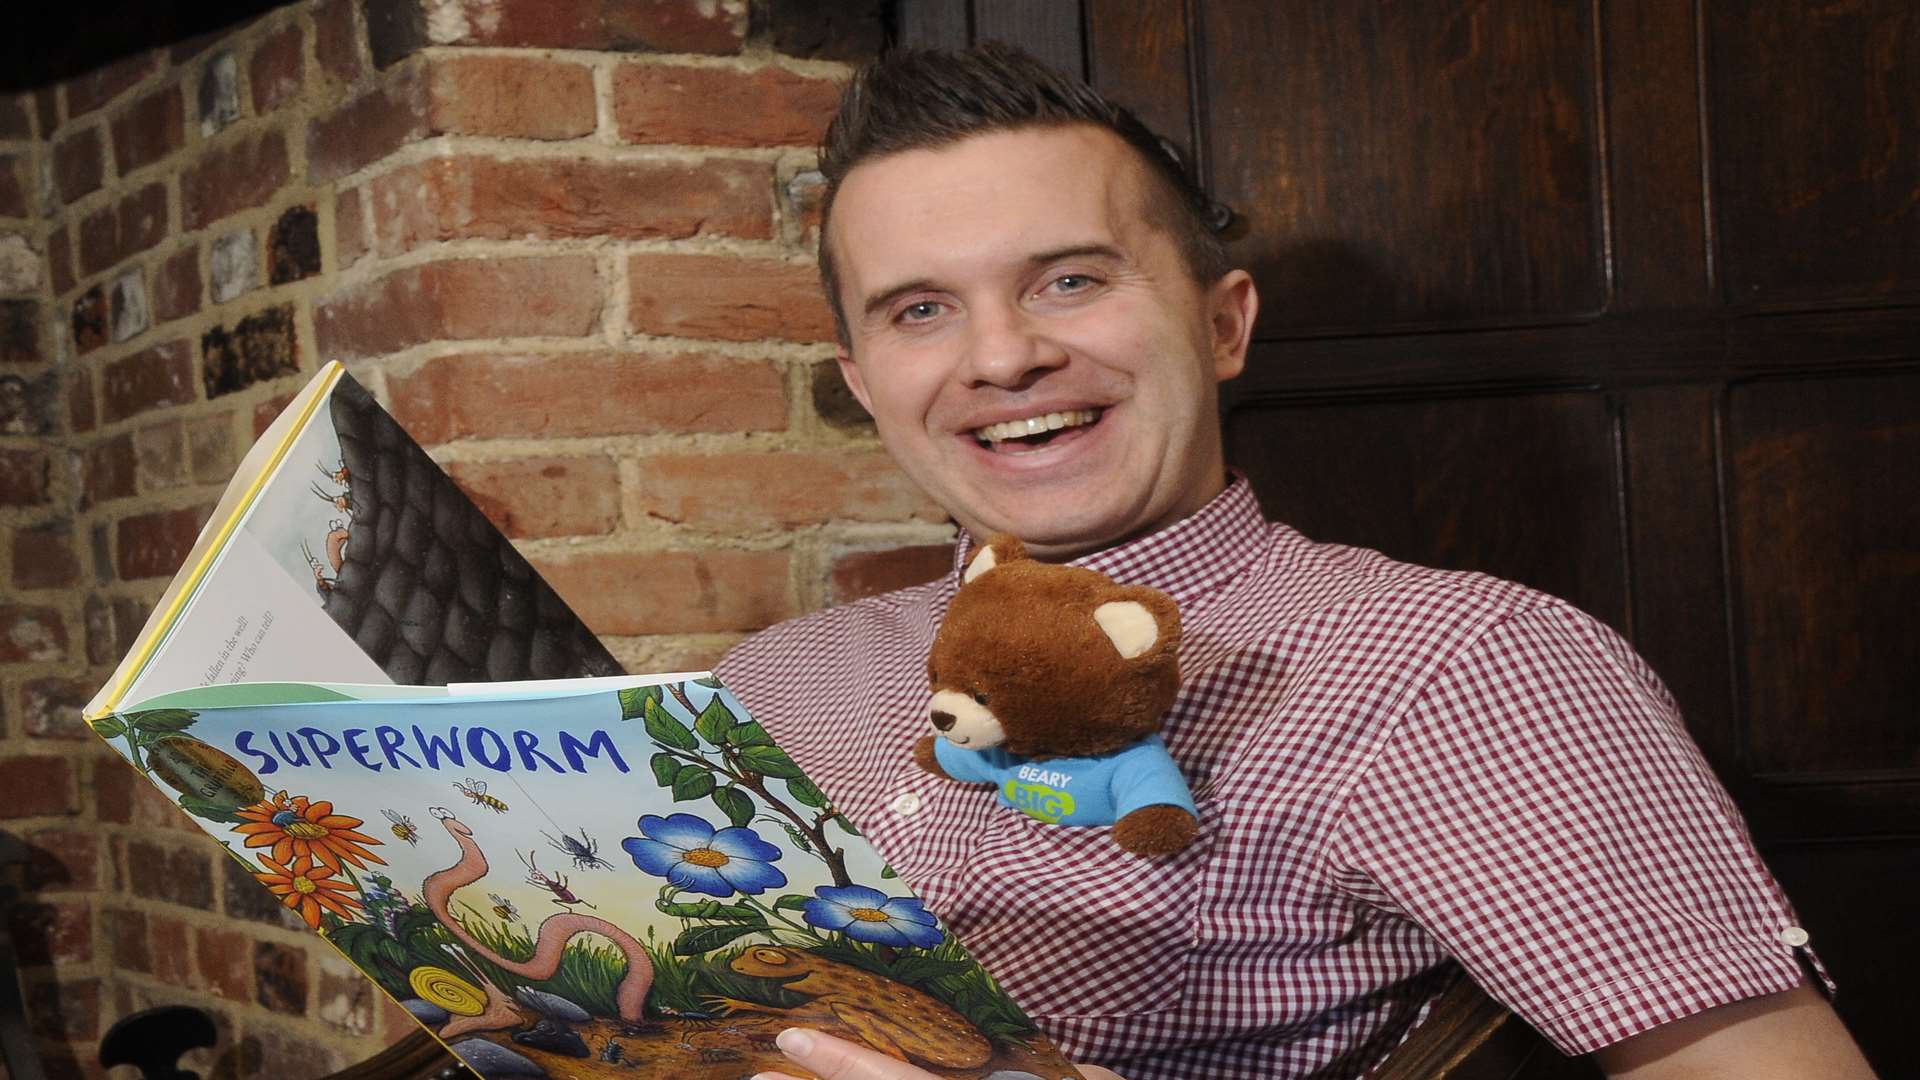 Phil Gallagher of CBeebies' Mister Maker fame is an honorary patron of the KM Charity Team and big supporter of their child literacy work.